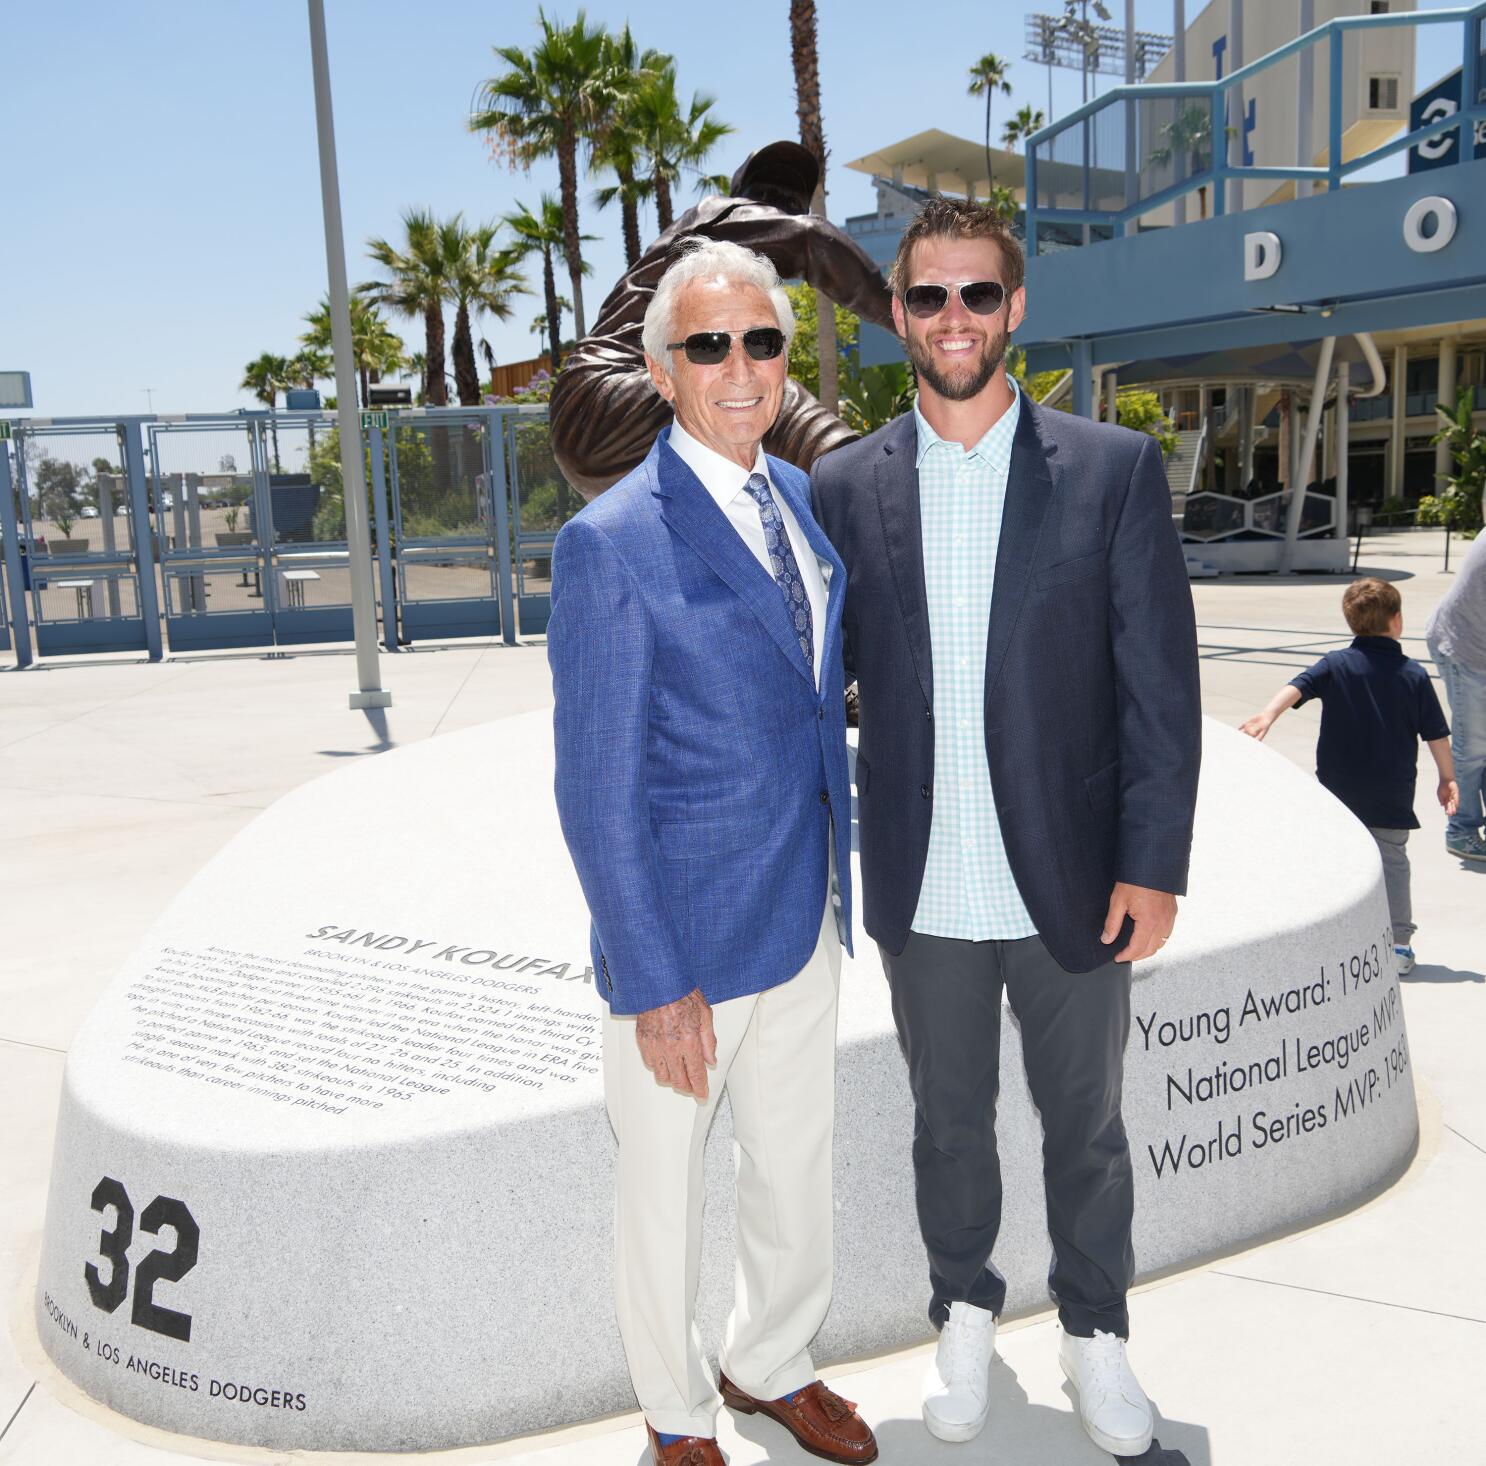 Sandy Koufax statue among $100 million in renovations coming to